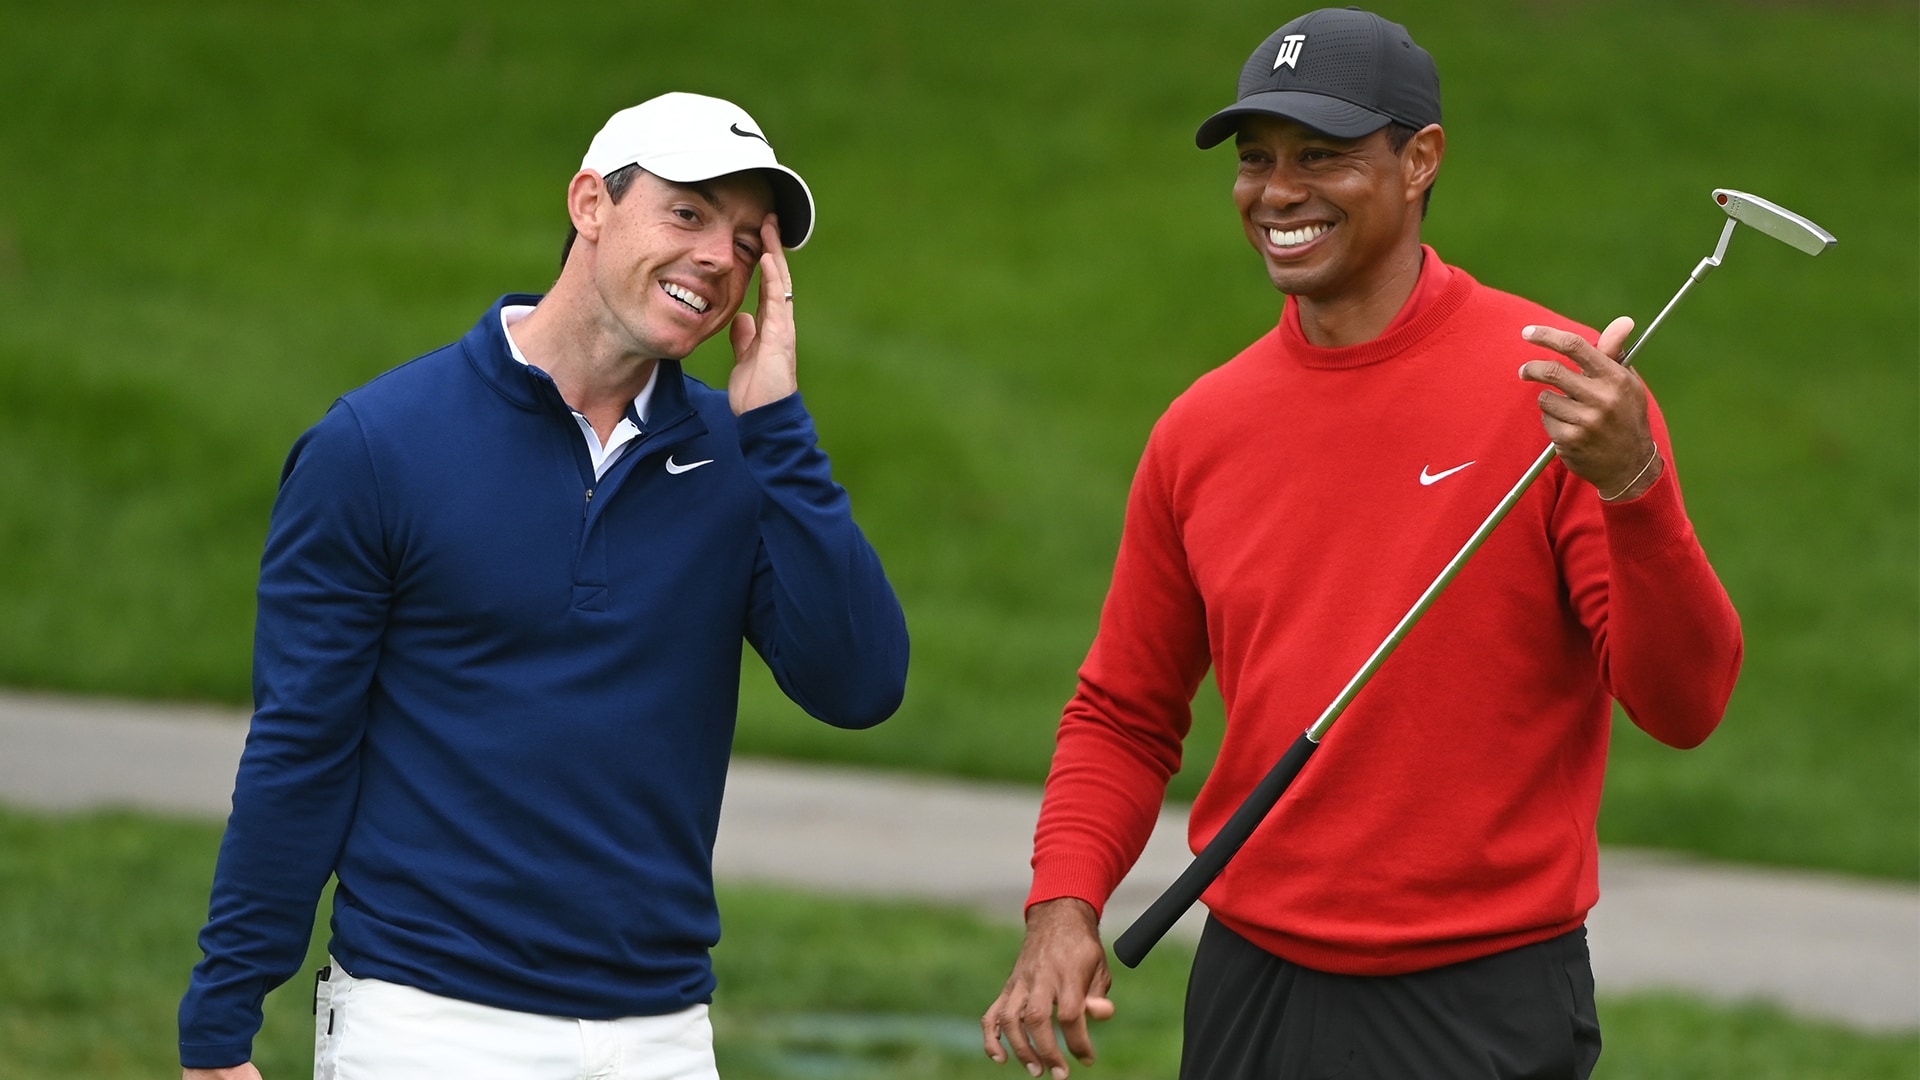 2021 Masters: Tiger Woods’ trophy case shows Rory McIlroy why majors are what matter